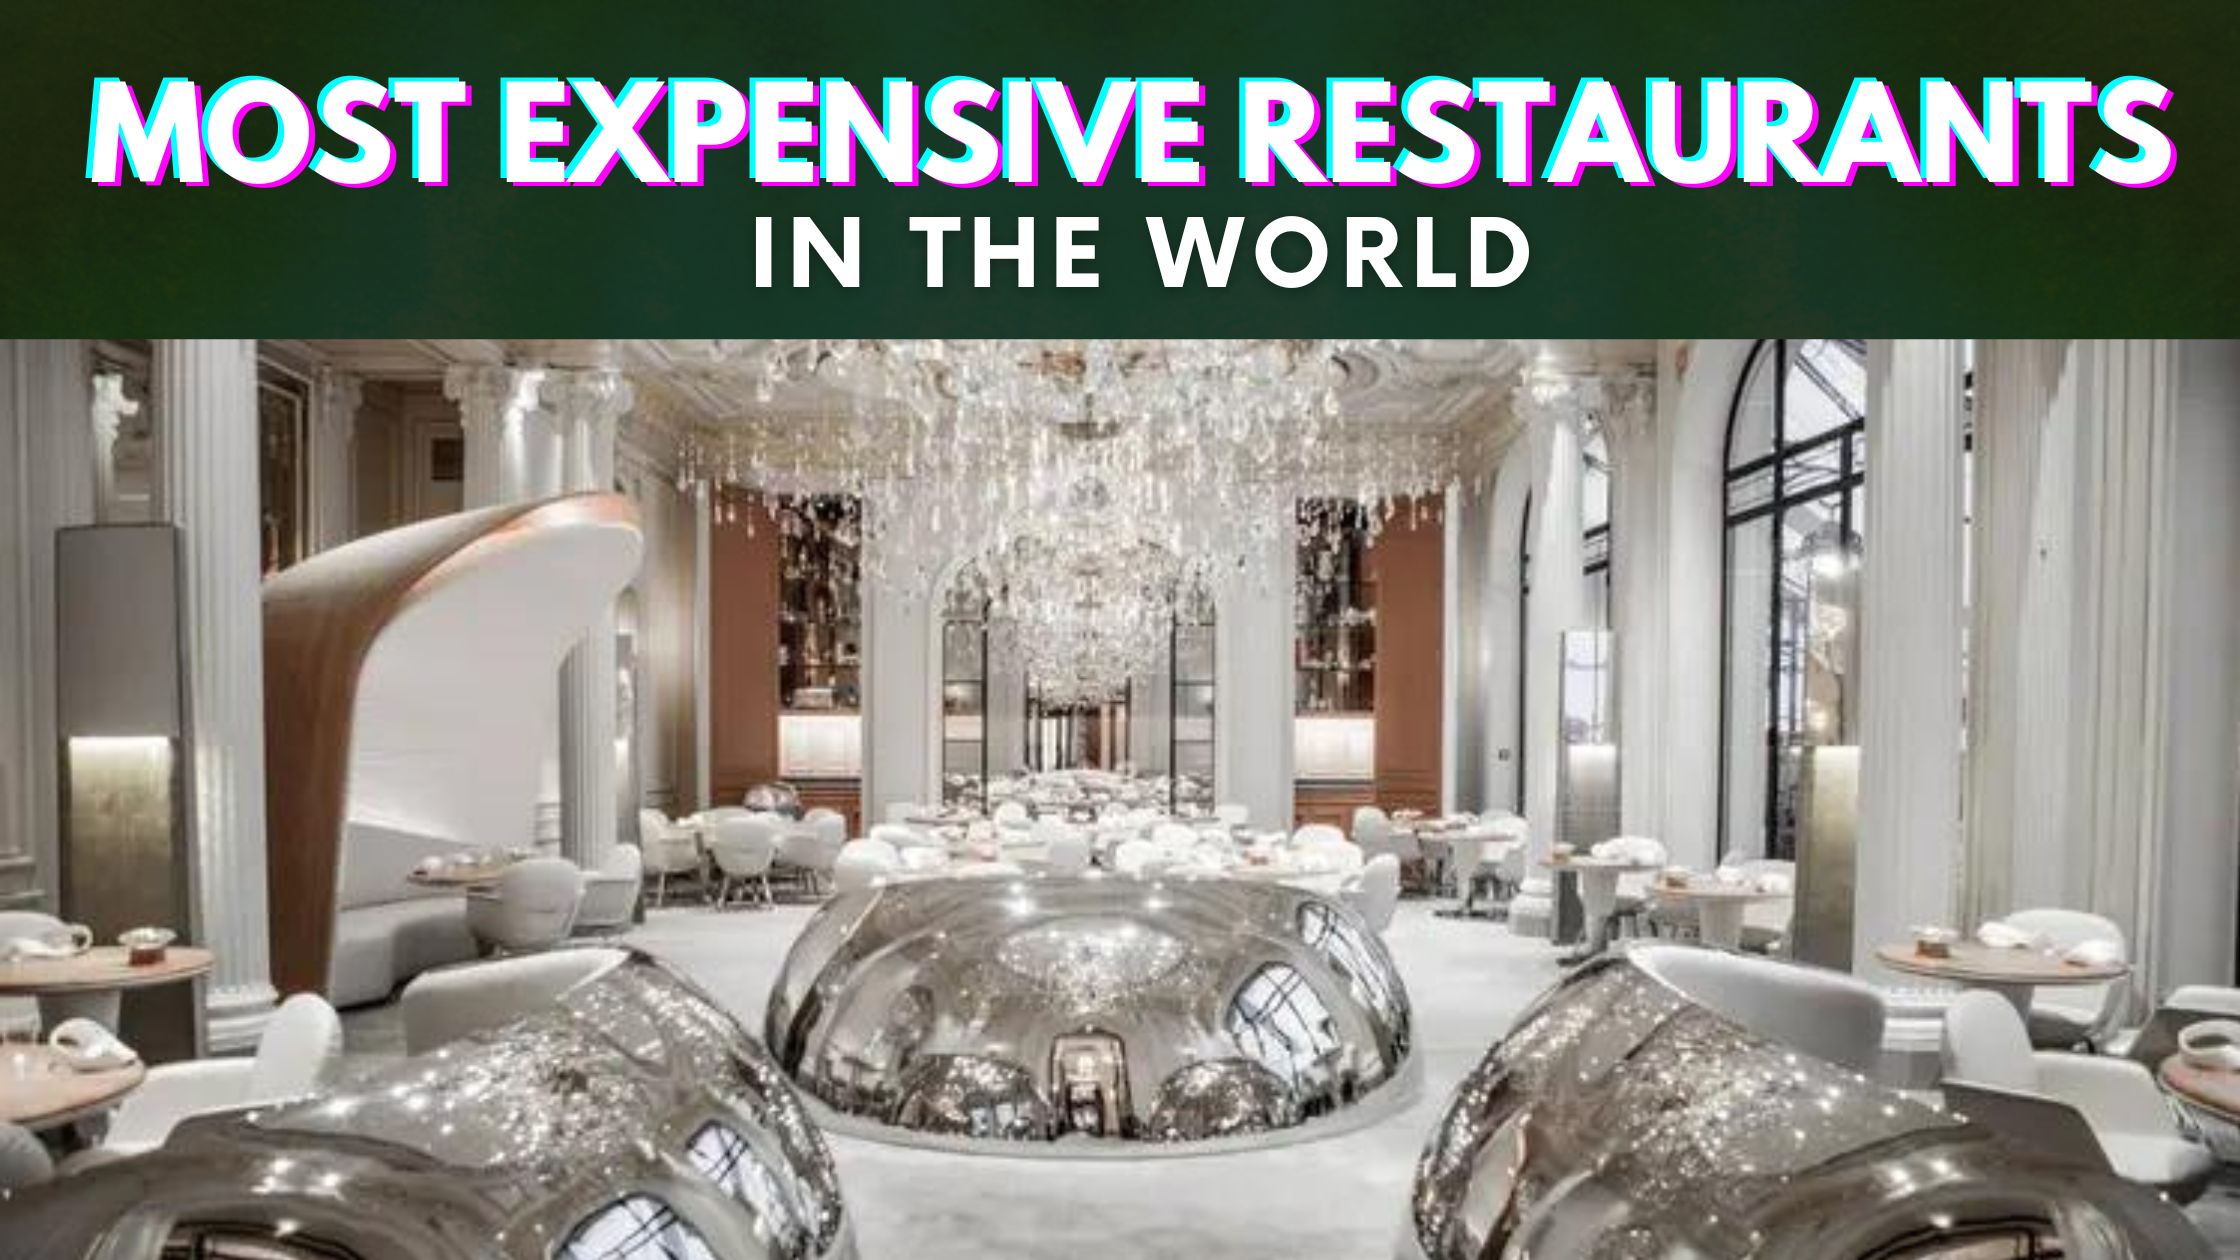 Top 10 Most Expensive Restaurants in the World